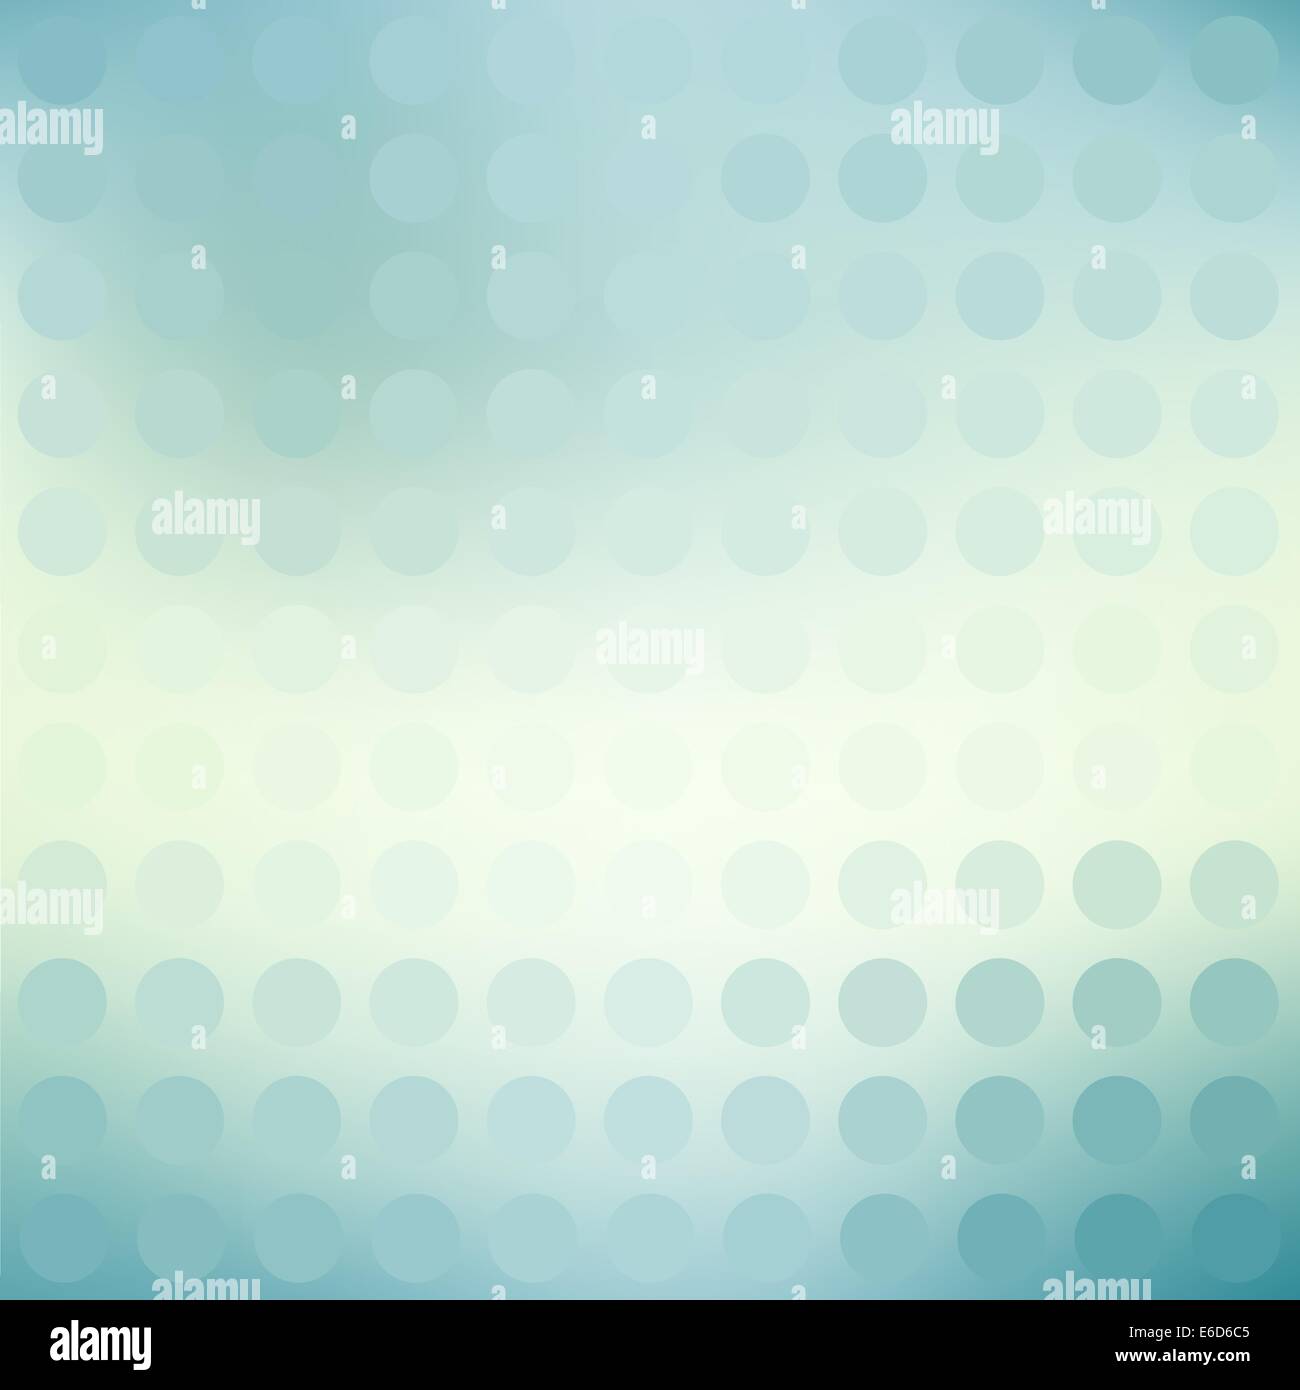 Abstract editable vector background of a glass-like pattern Stock Vector